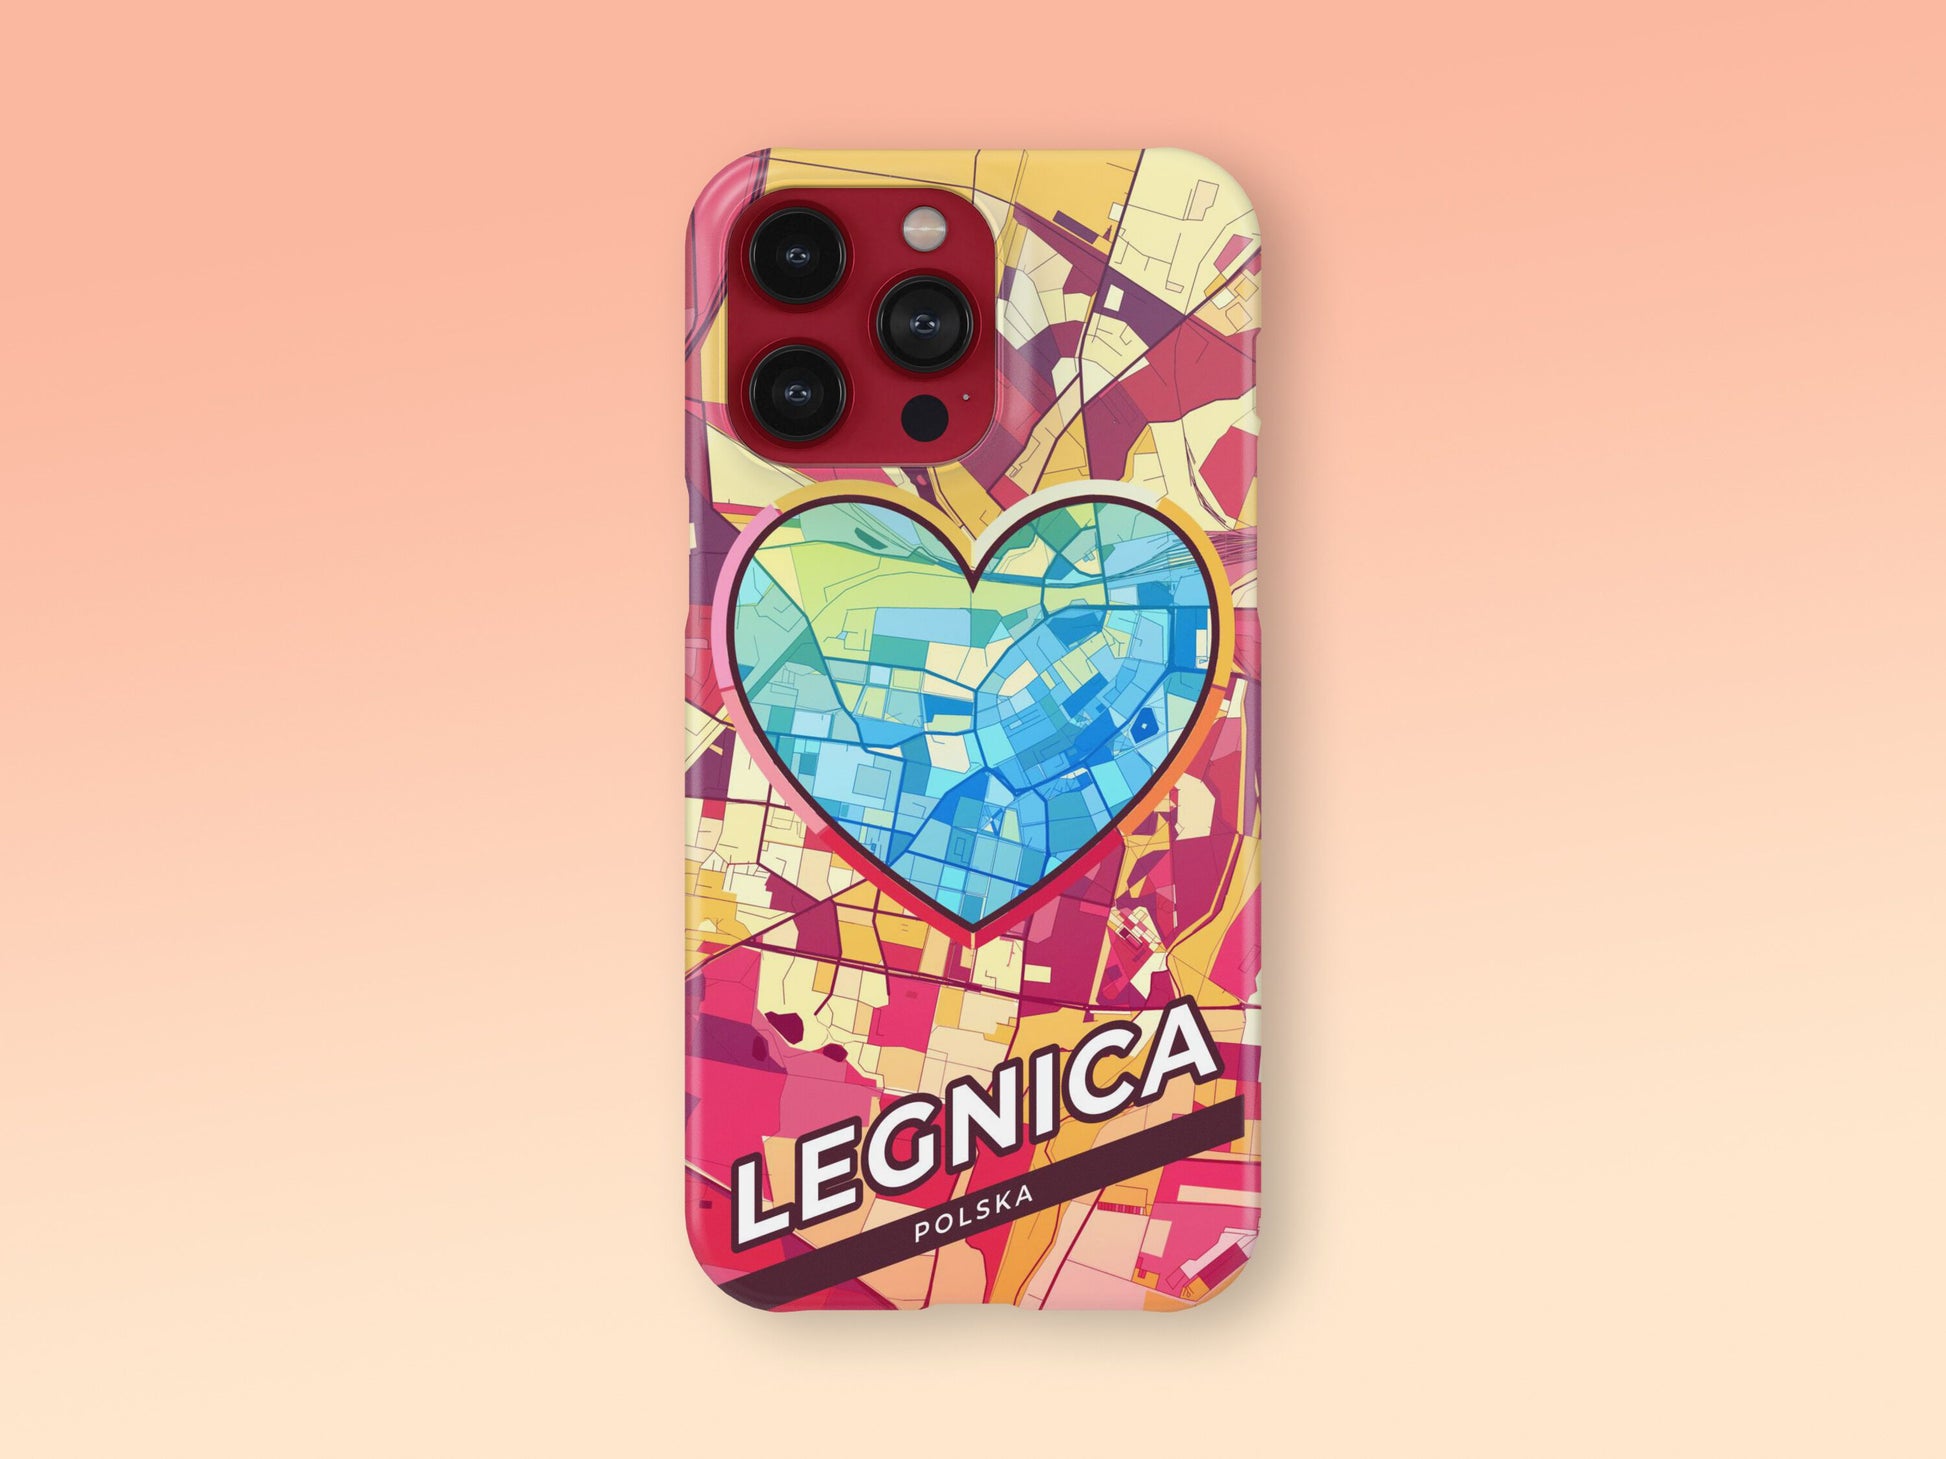 Legnica Poland slim phone case with colorful icon. Birthday, wedding or housewarming gift. Couple match cases. 2